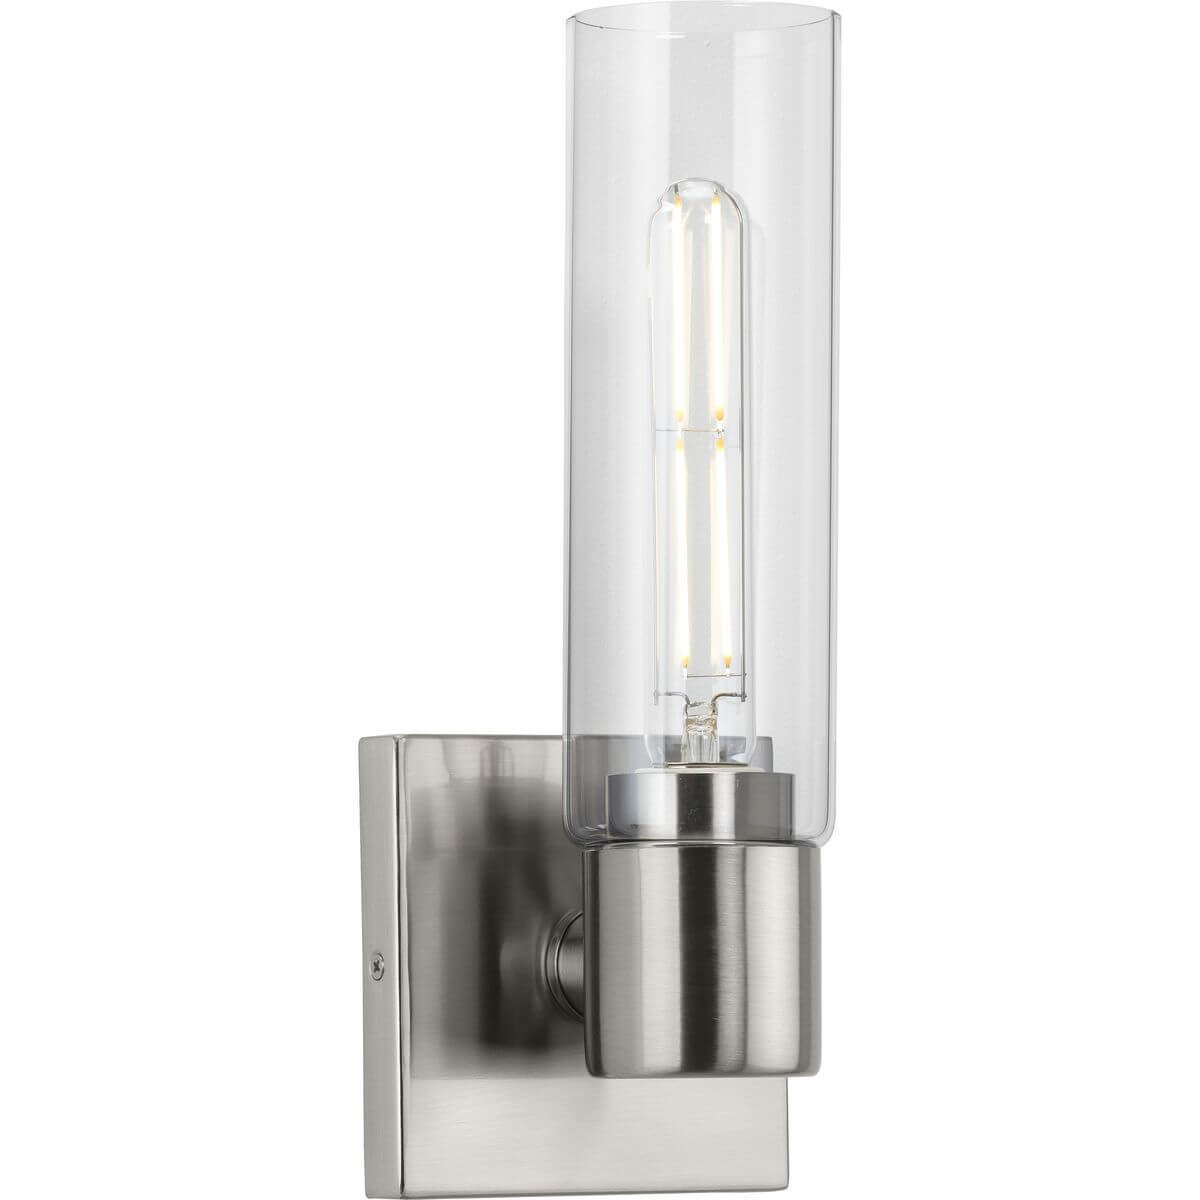 Progress Lighting Clarion 1 Light 13 inch Tall Bath Vanity Light in Brushed Nickel with Clear Glass P300299-009